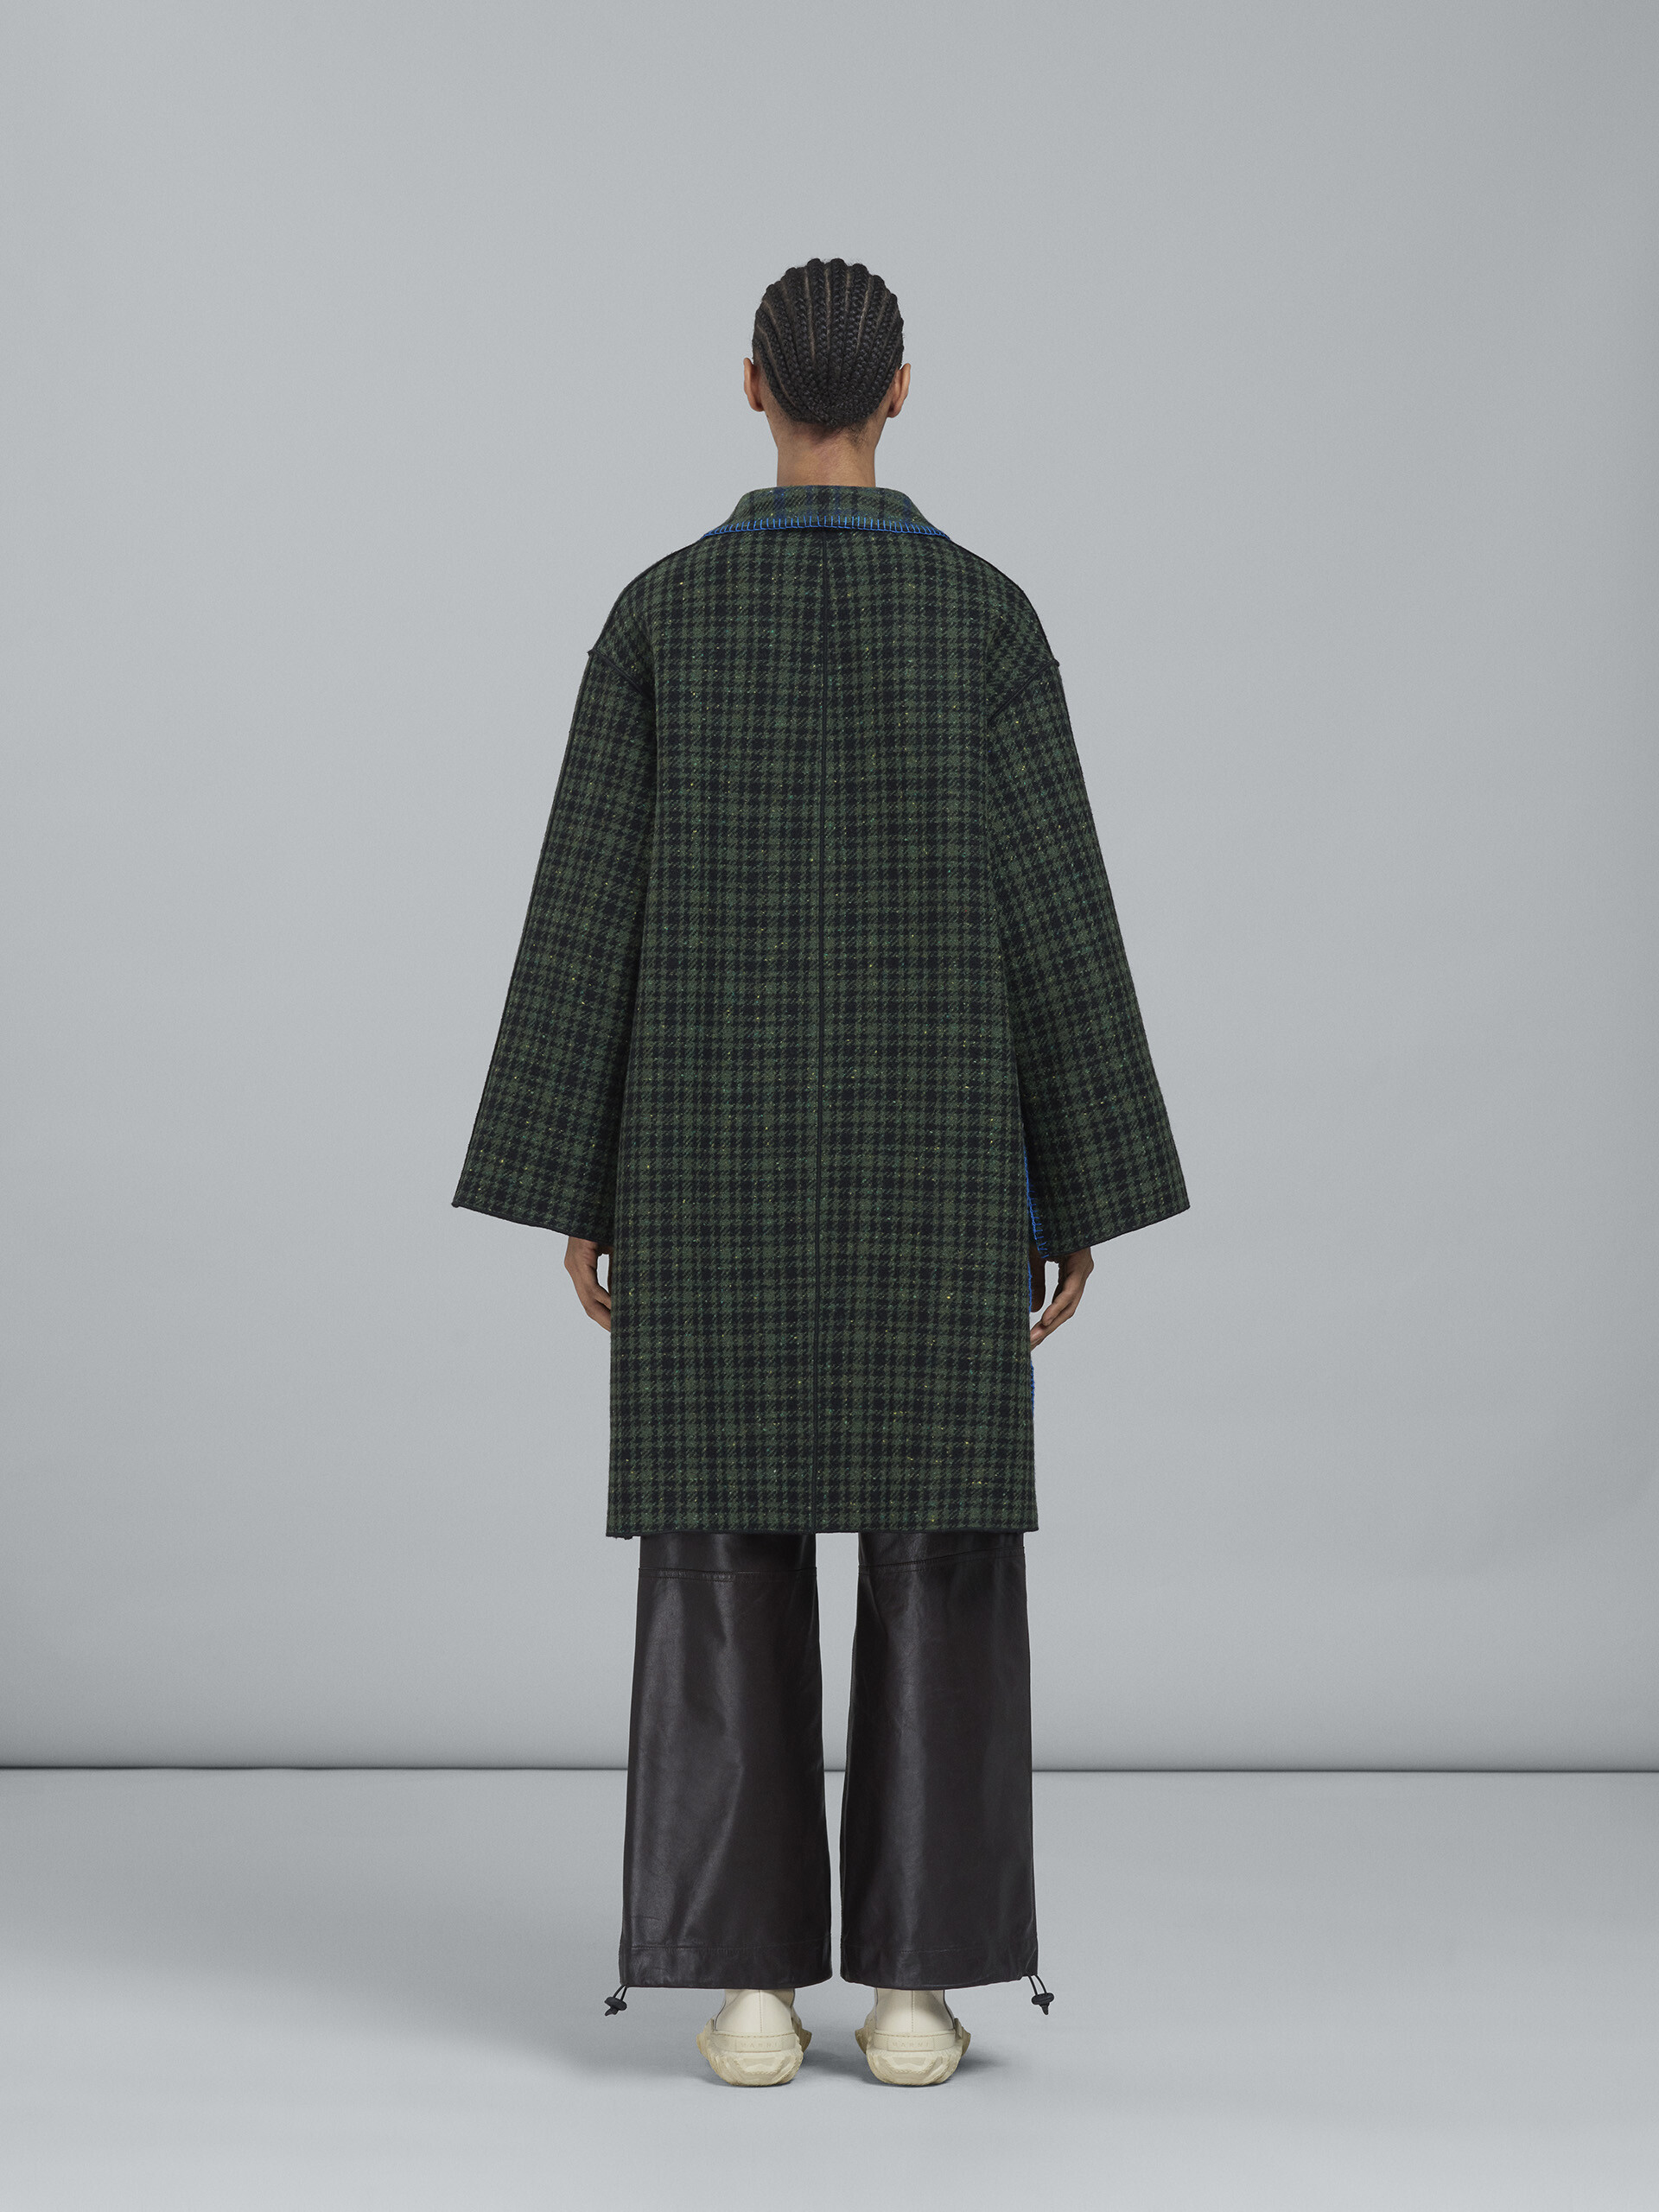 Double face check wool coat - Coat - Image 3